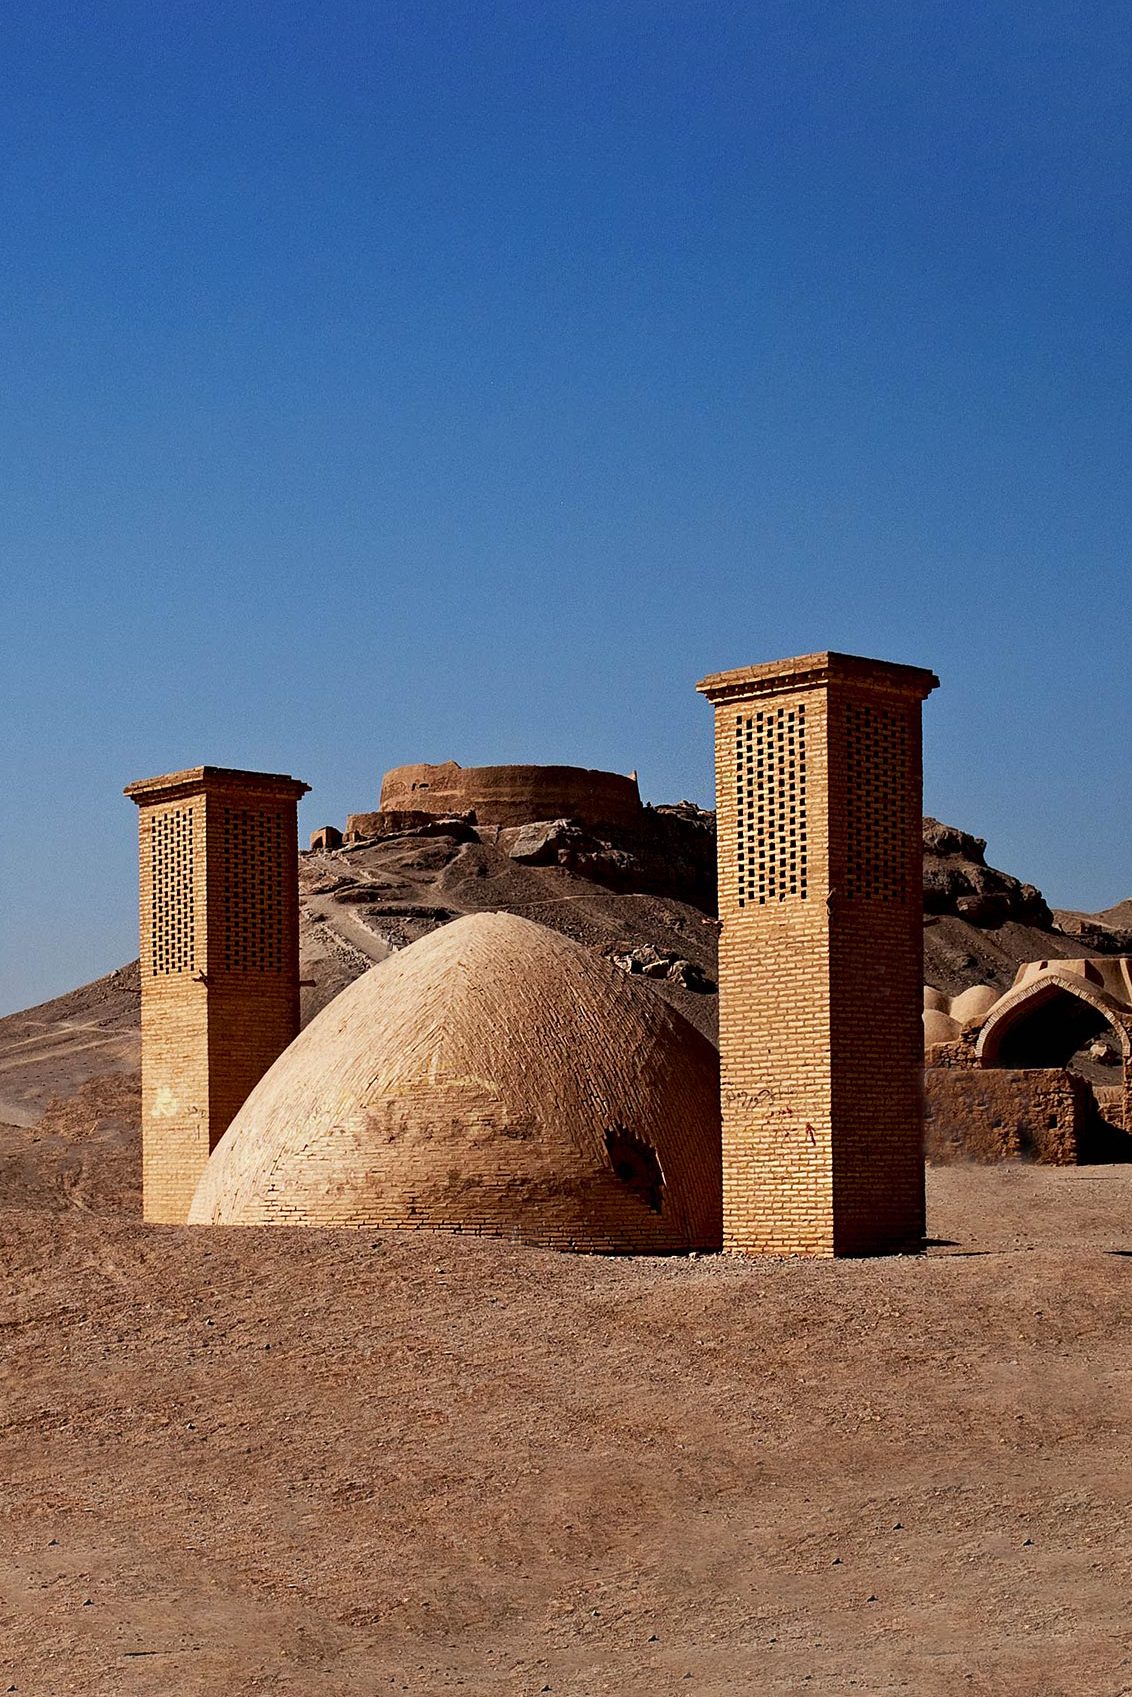 A photograph of ancient Zoroastrian burial towers